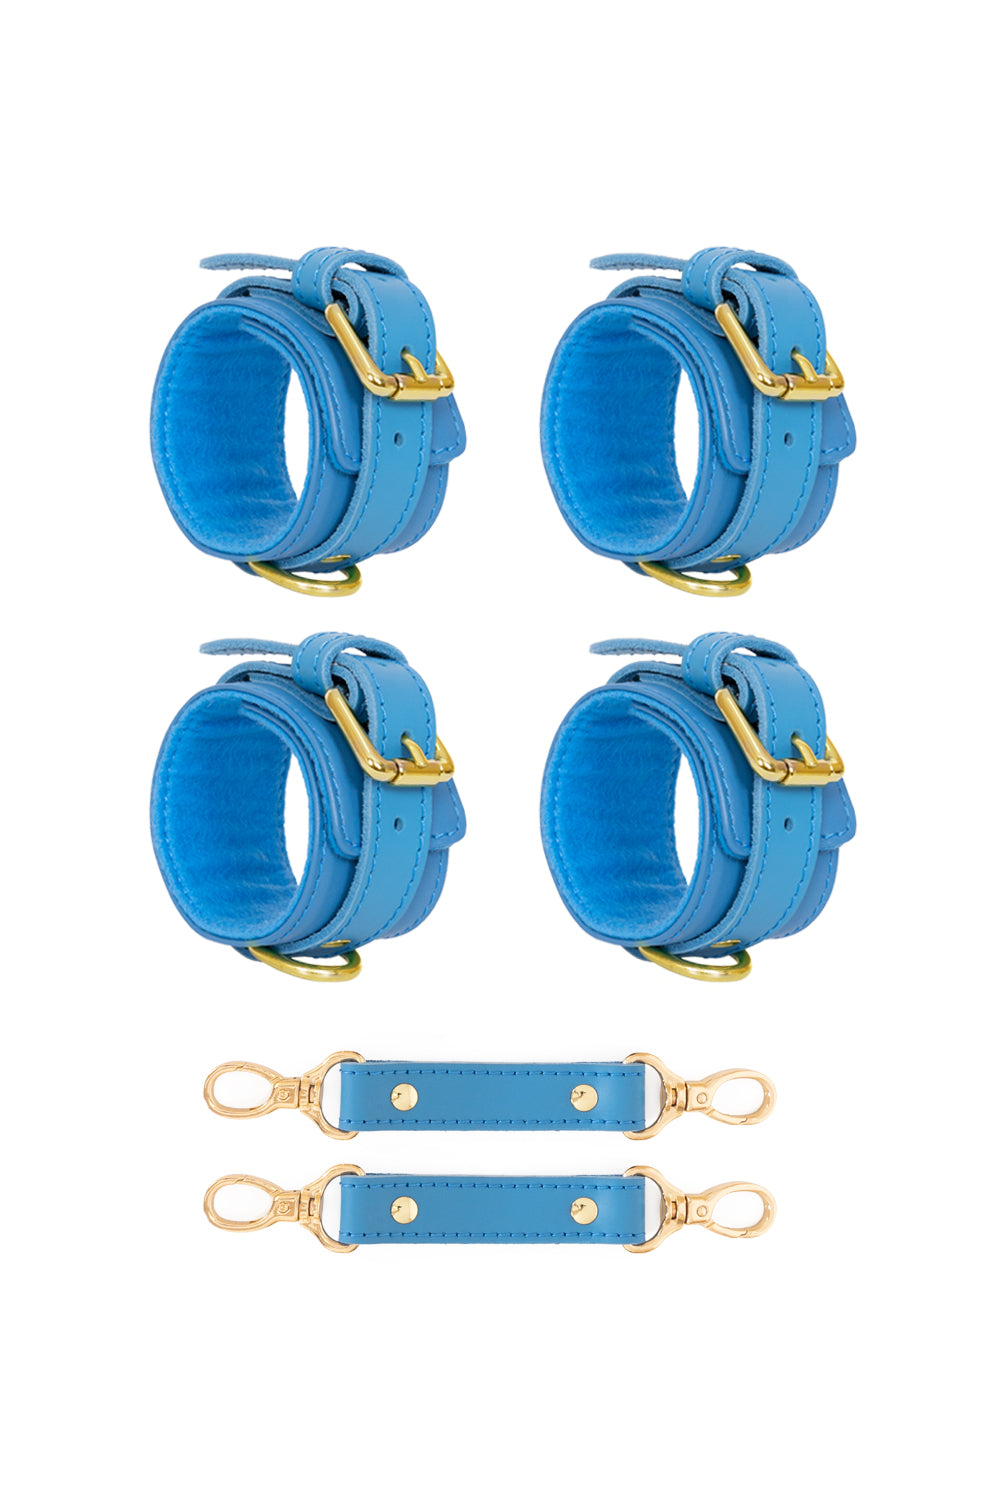 2 in 1 Hand and Ankle cuffs Leather Set. 10 colors